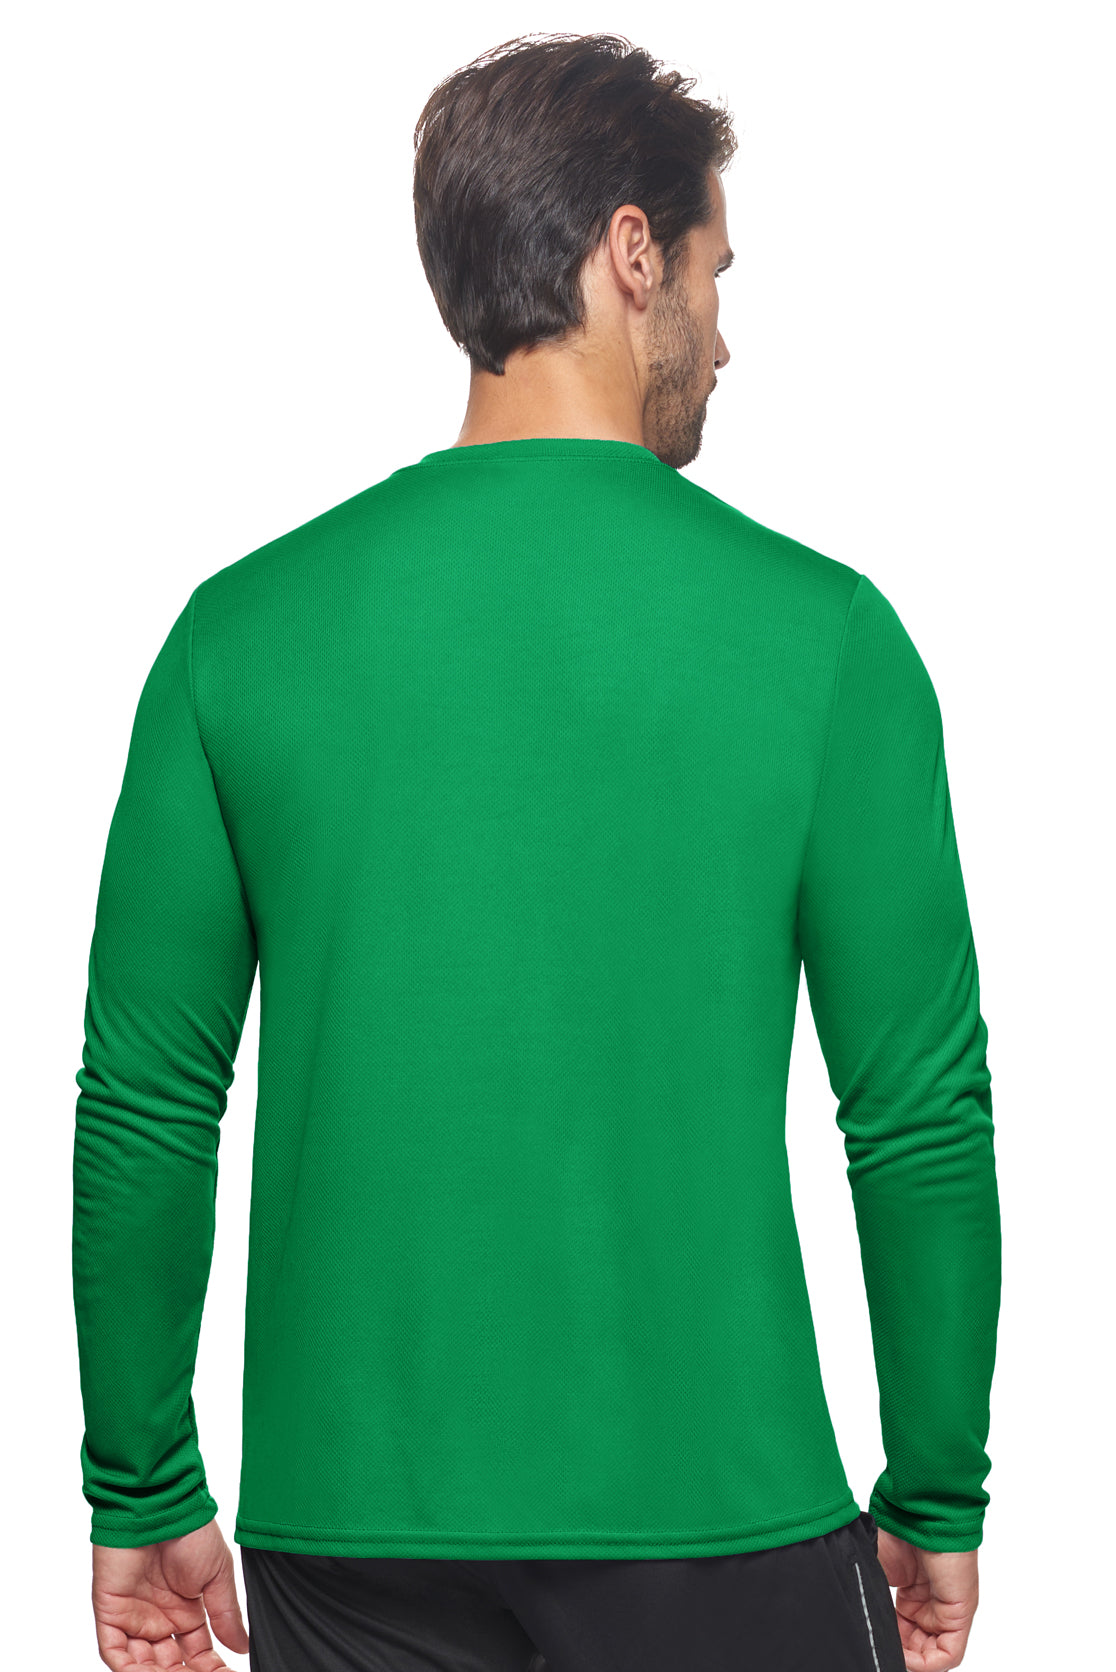 Expert Brand Wholesale Men's Oxymesh Performance Long Sleeve Tec Tee Made in USA AJ901D Kelly Green Image 3#kelly-green